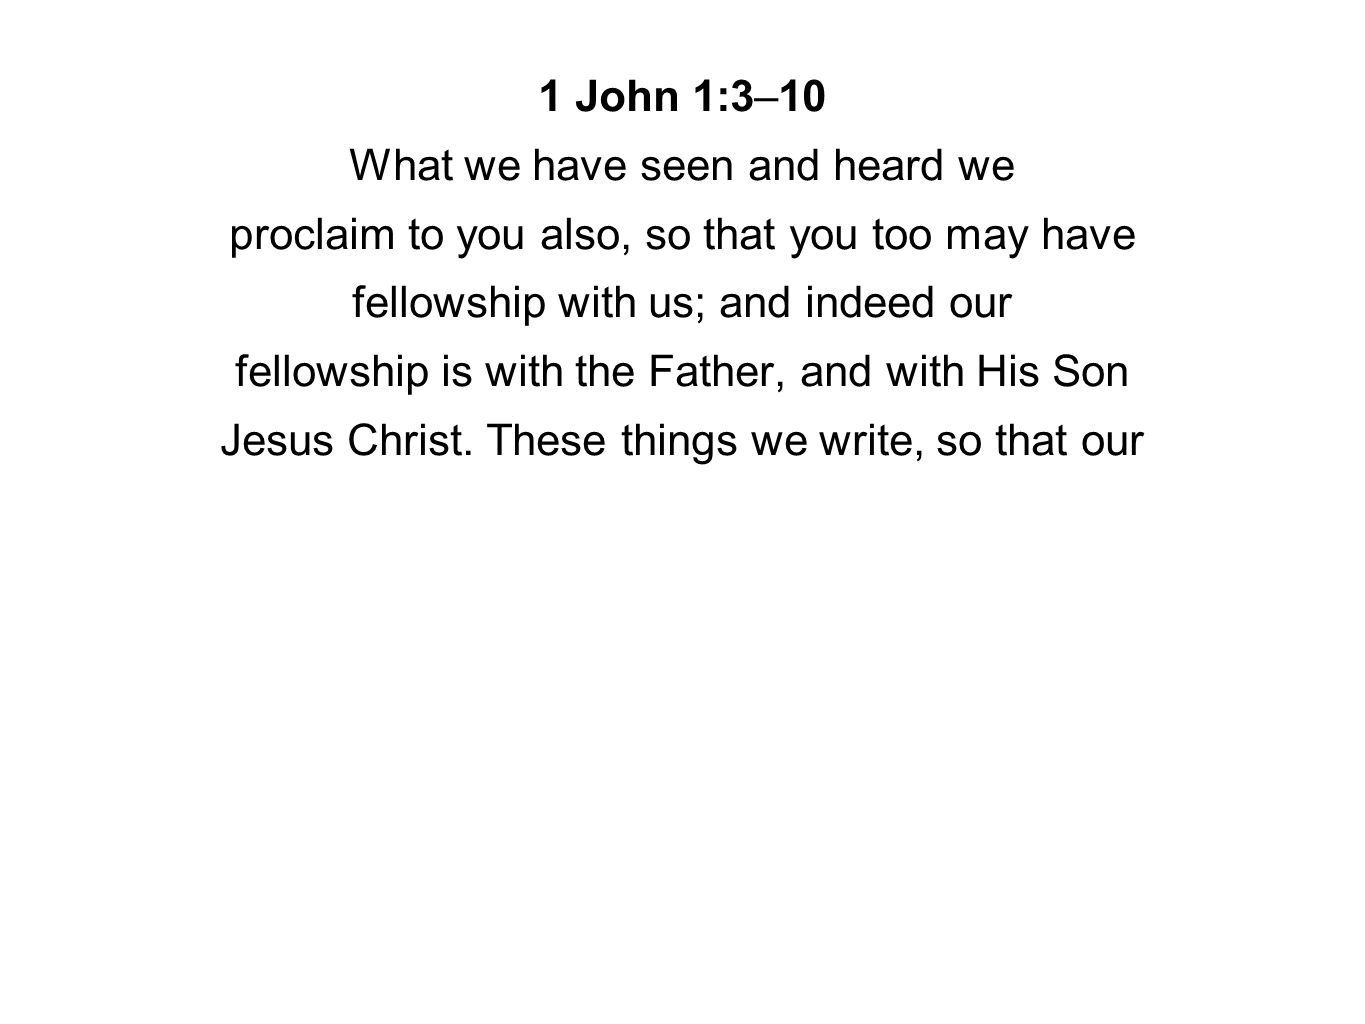 1 John 1:3–10 What we have seen and heard we proclaim to you also, so that you too may have fellowship with us; and indeed our fellowship is with the Father, and with His Son Jesus Christ.